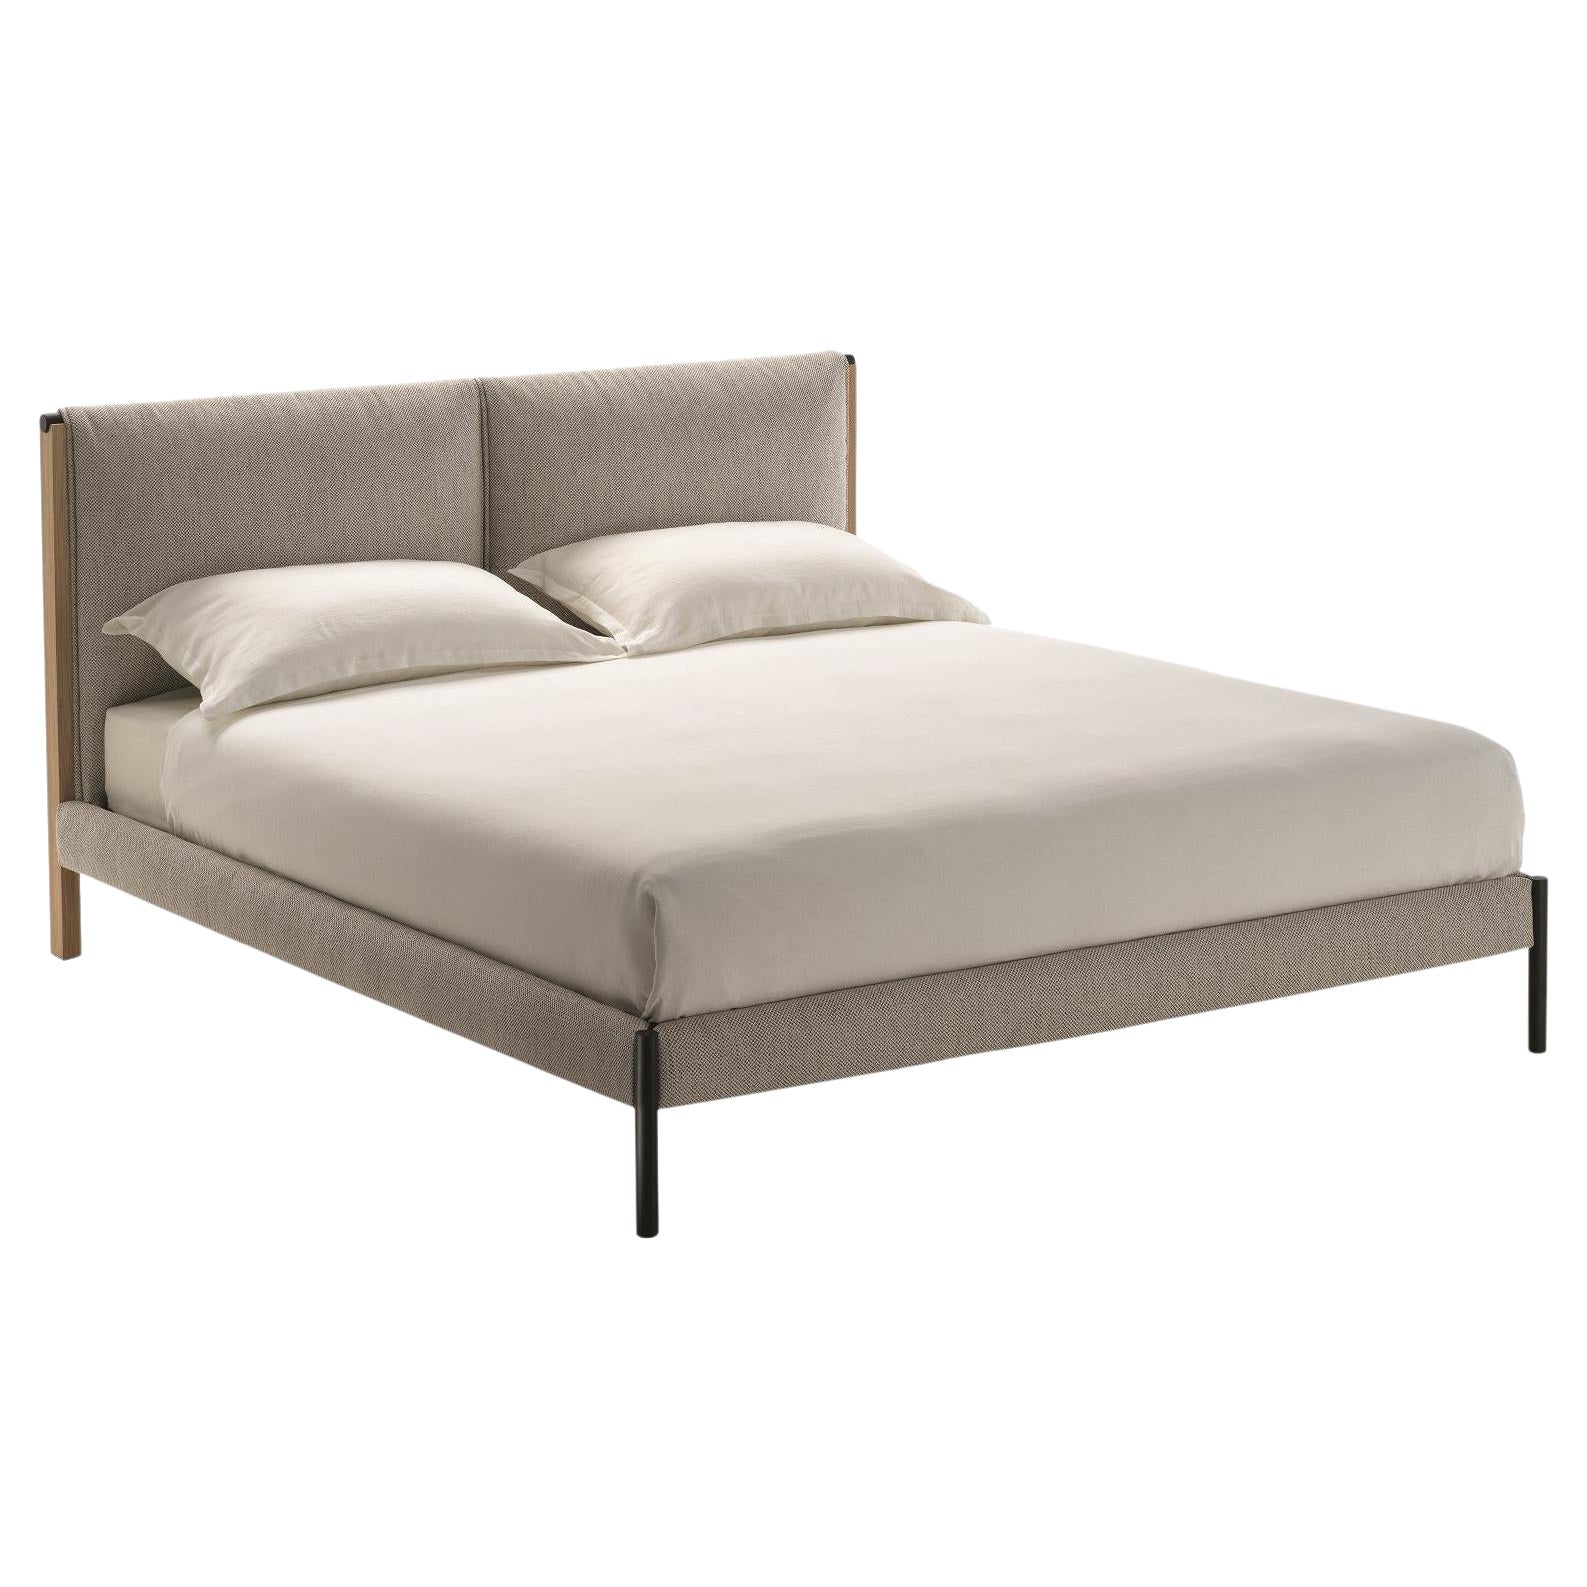 Zanotta King Size Ricordi Bed with Separate Springing in Toce Upholstery For Sale